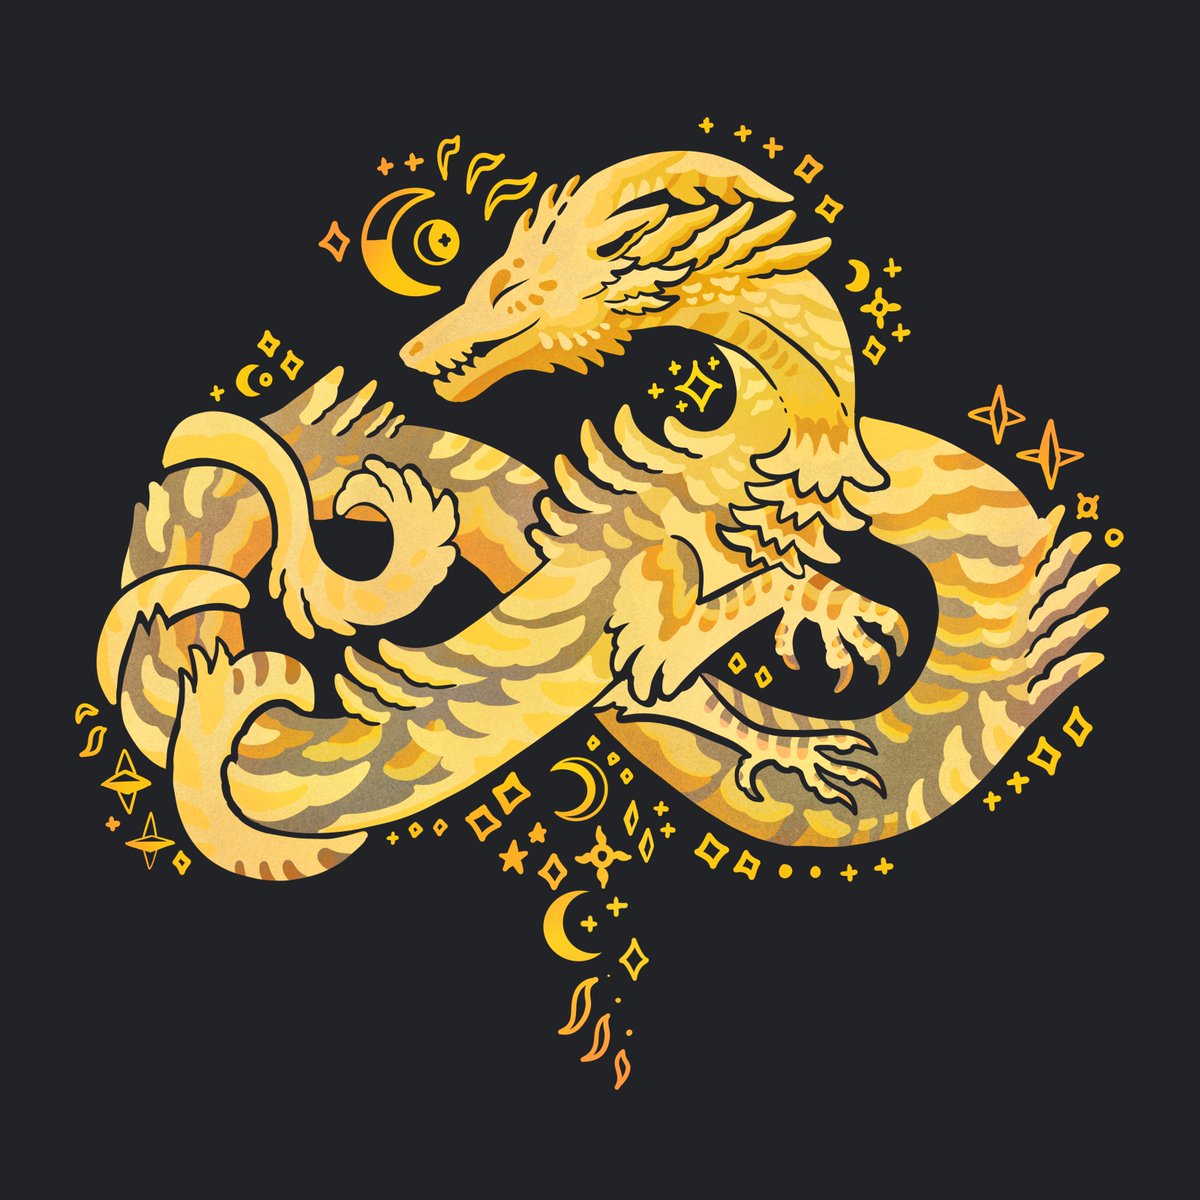 「 #AutismAcceptance dragon ~ now in gold!」|Diana 🐦 🇨🇦のイラスト